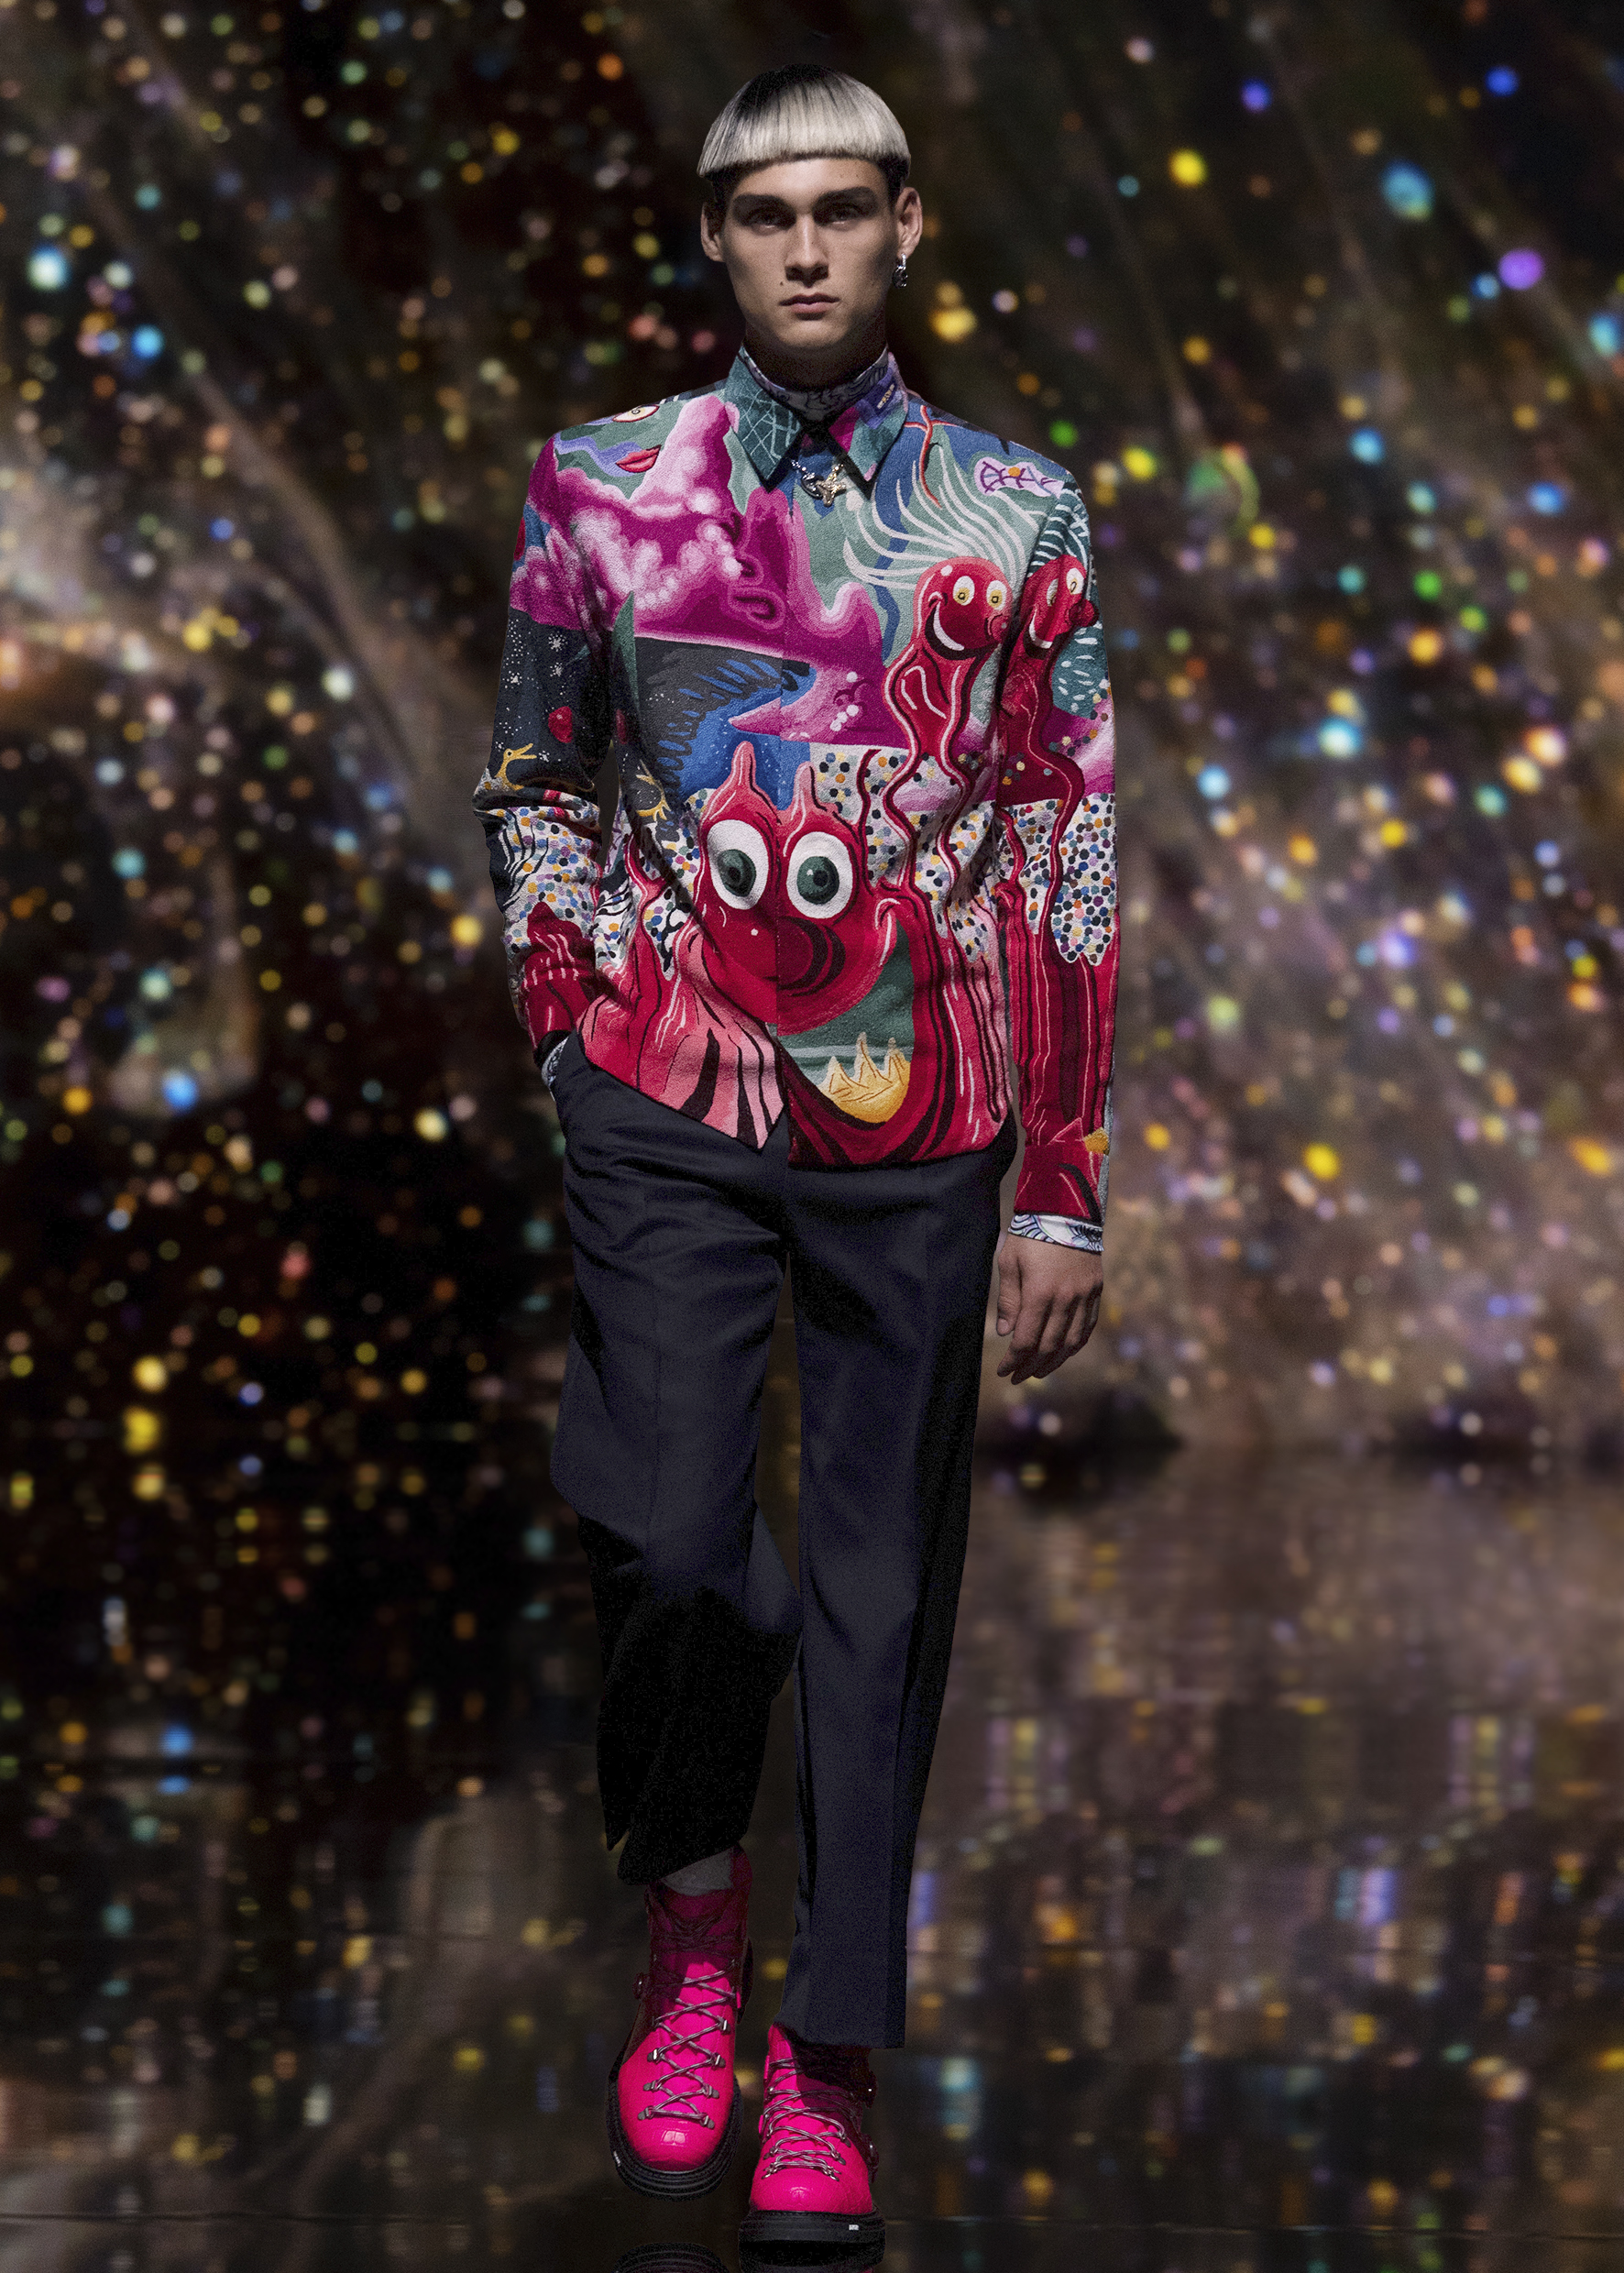 Dior Men Resort 2021 Menswear collection, runway looks, beauty, models, and  reviews.